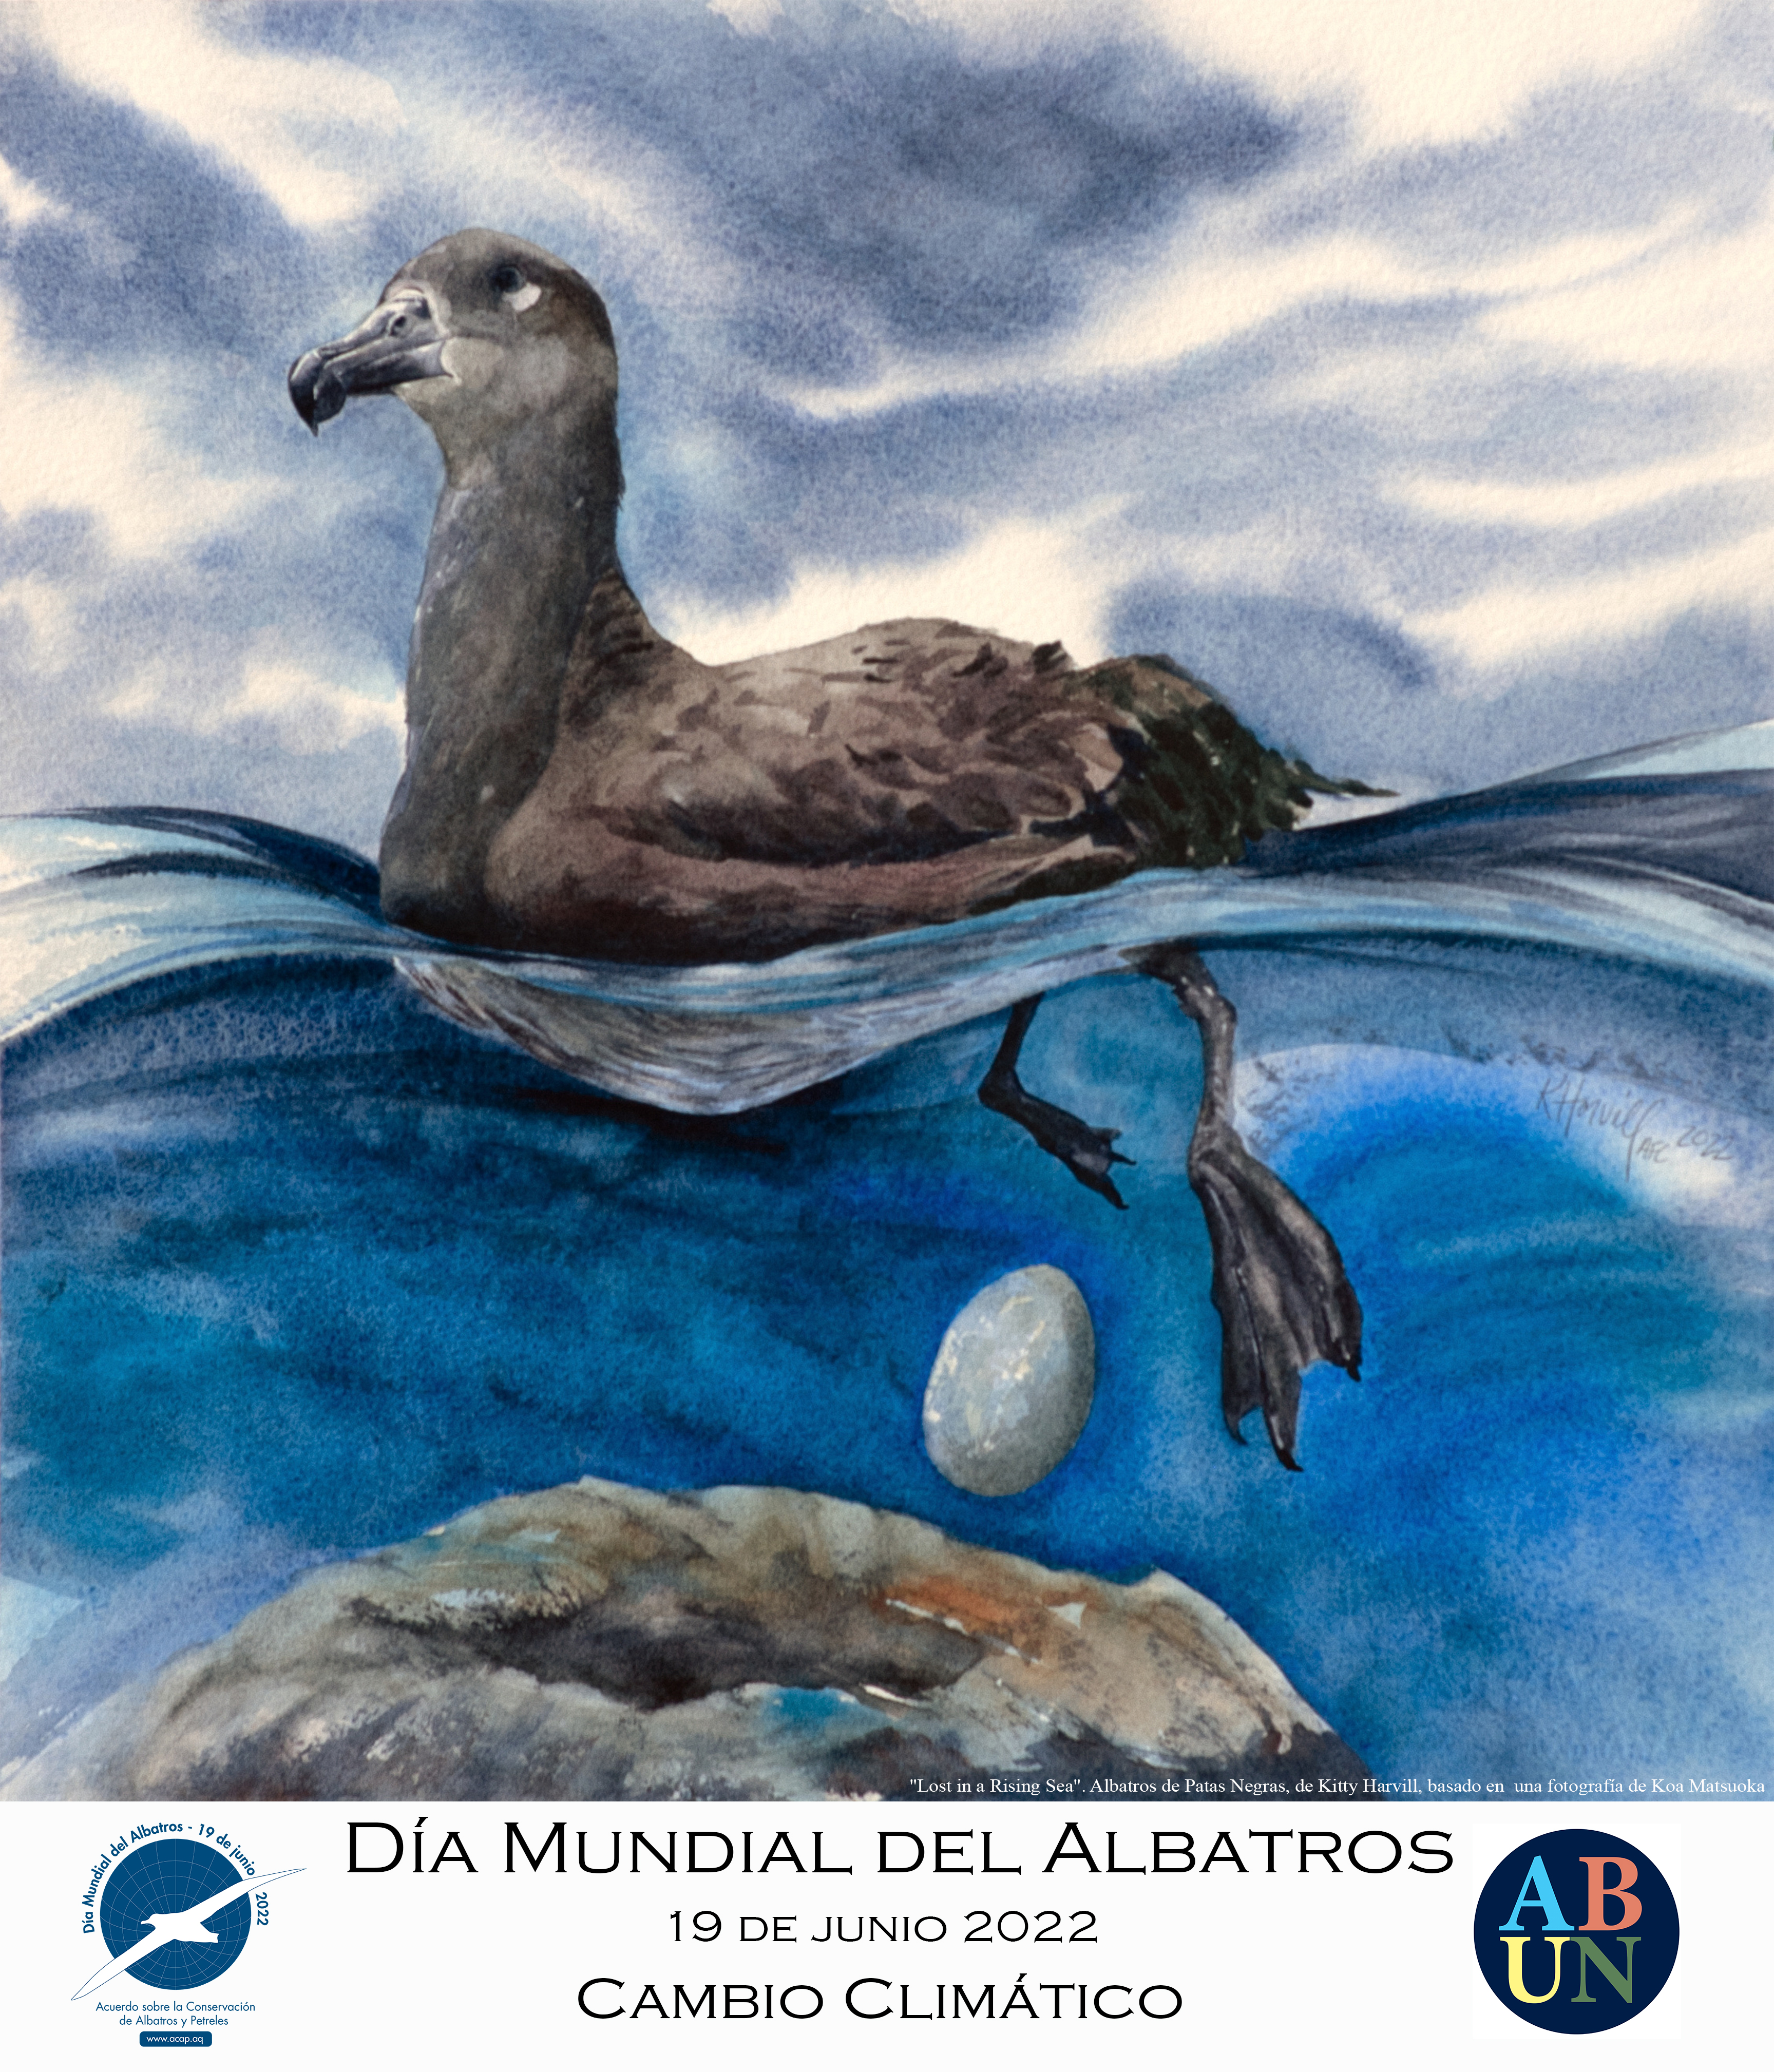 Sp Lost in a Rising Sea Black footed Albatross by Kitty Harvill after a photograph by Koa Matsuoka Spanish